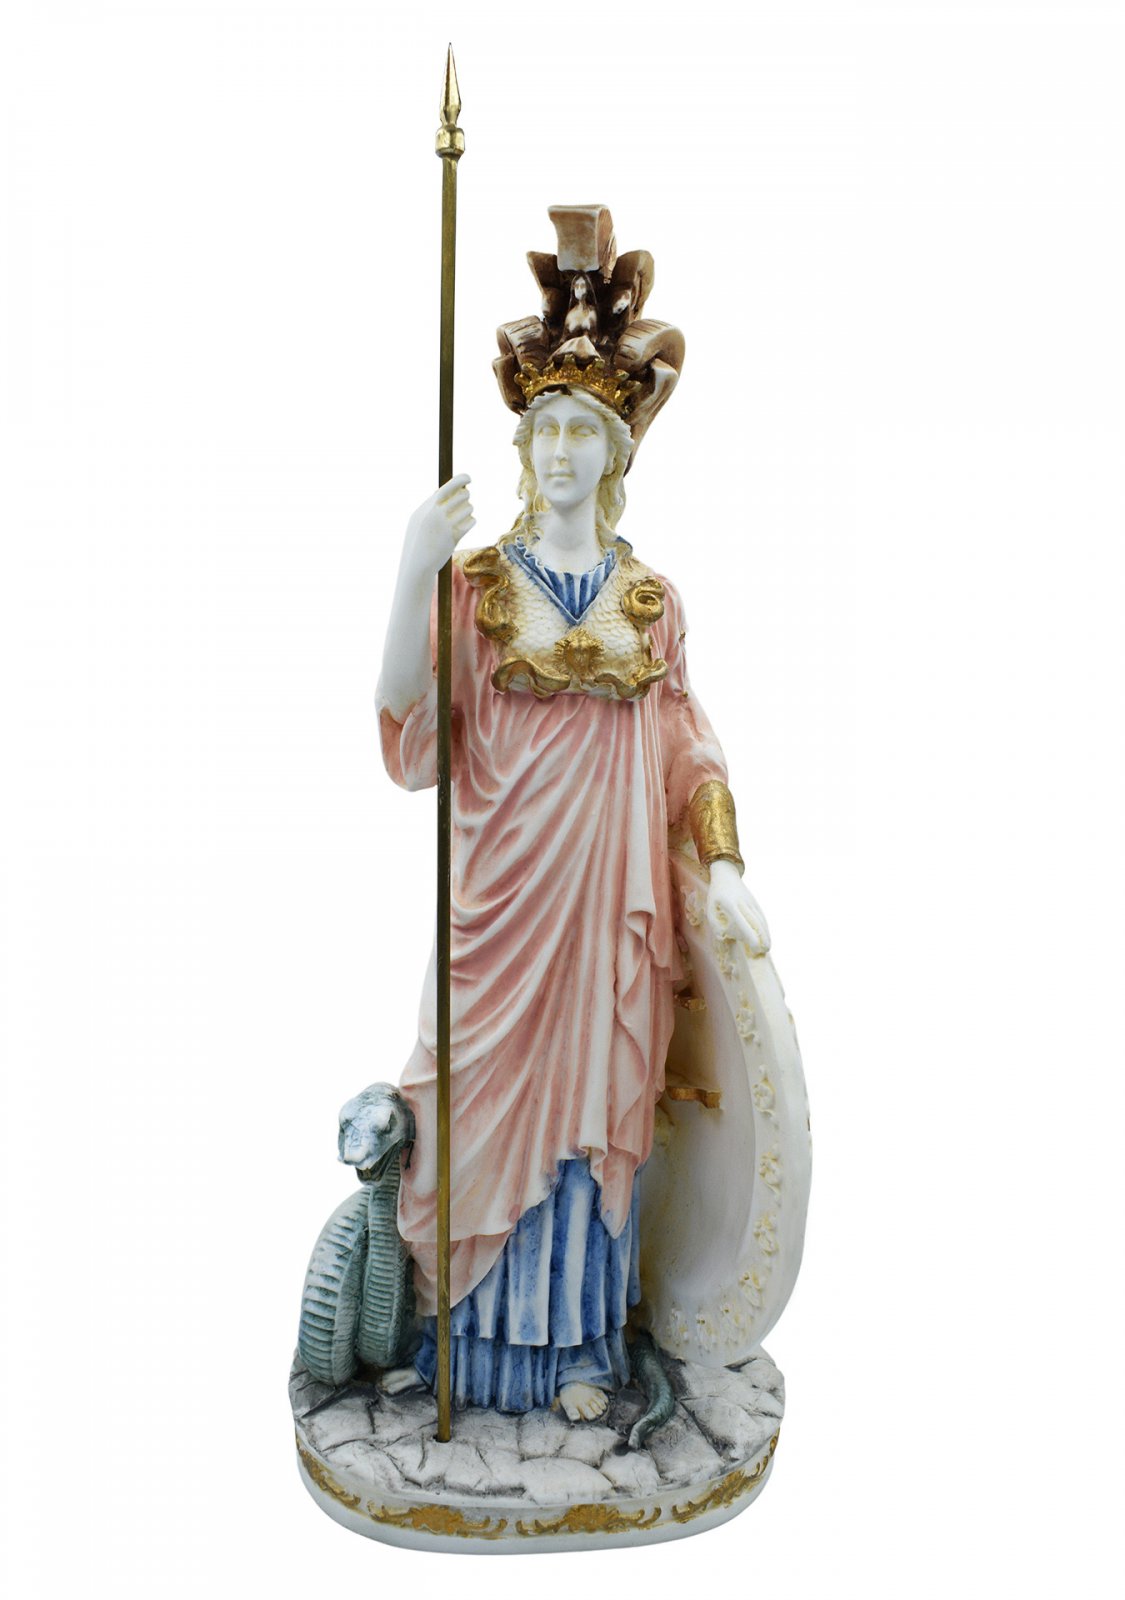 Painted Goddess Statuette